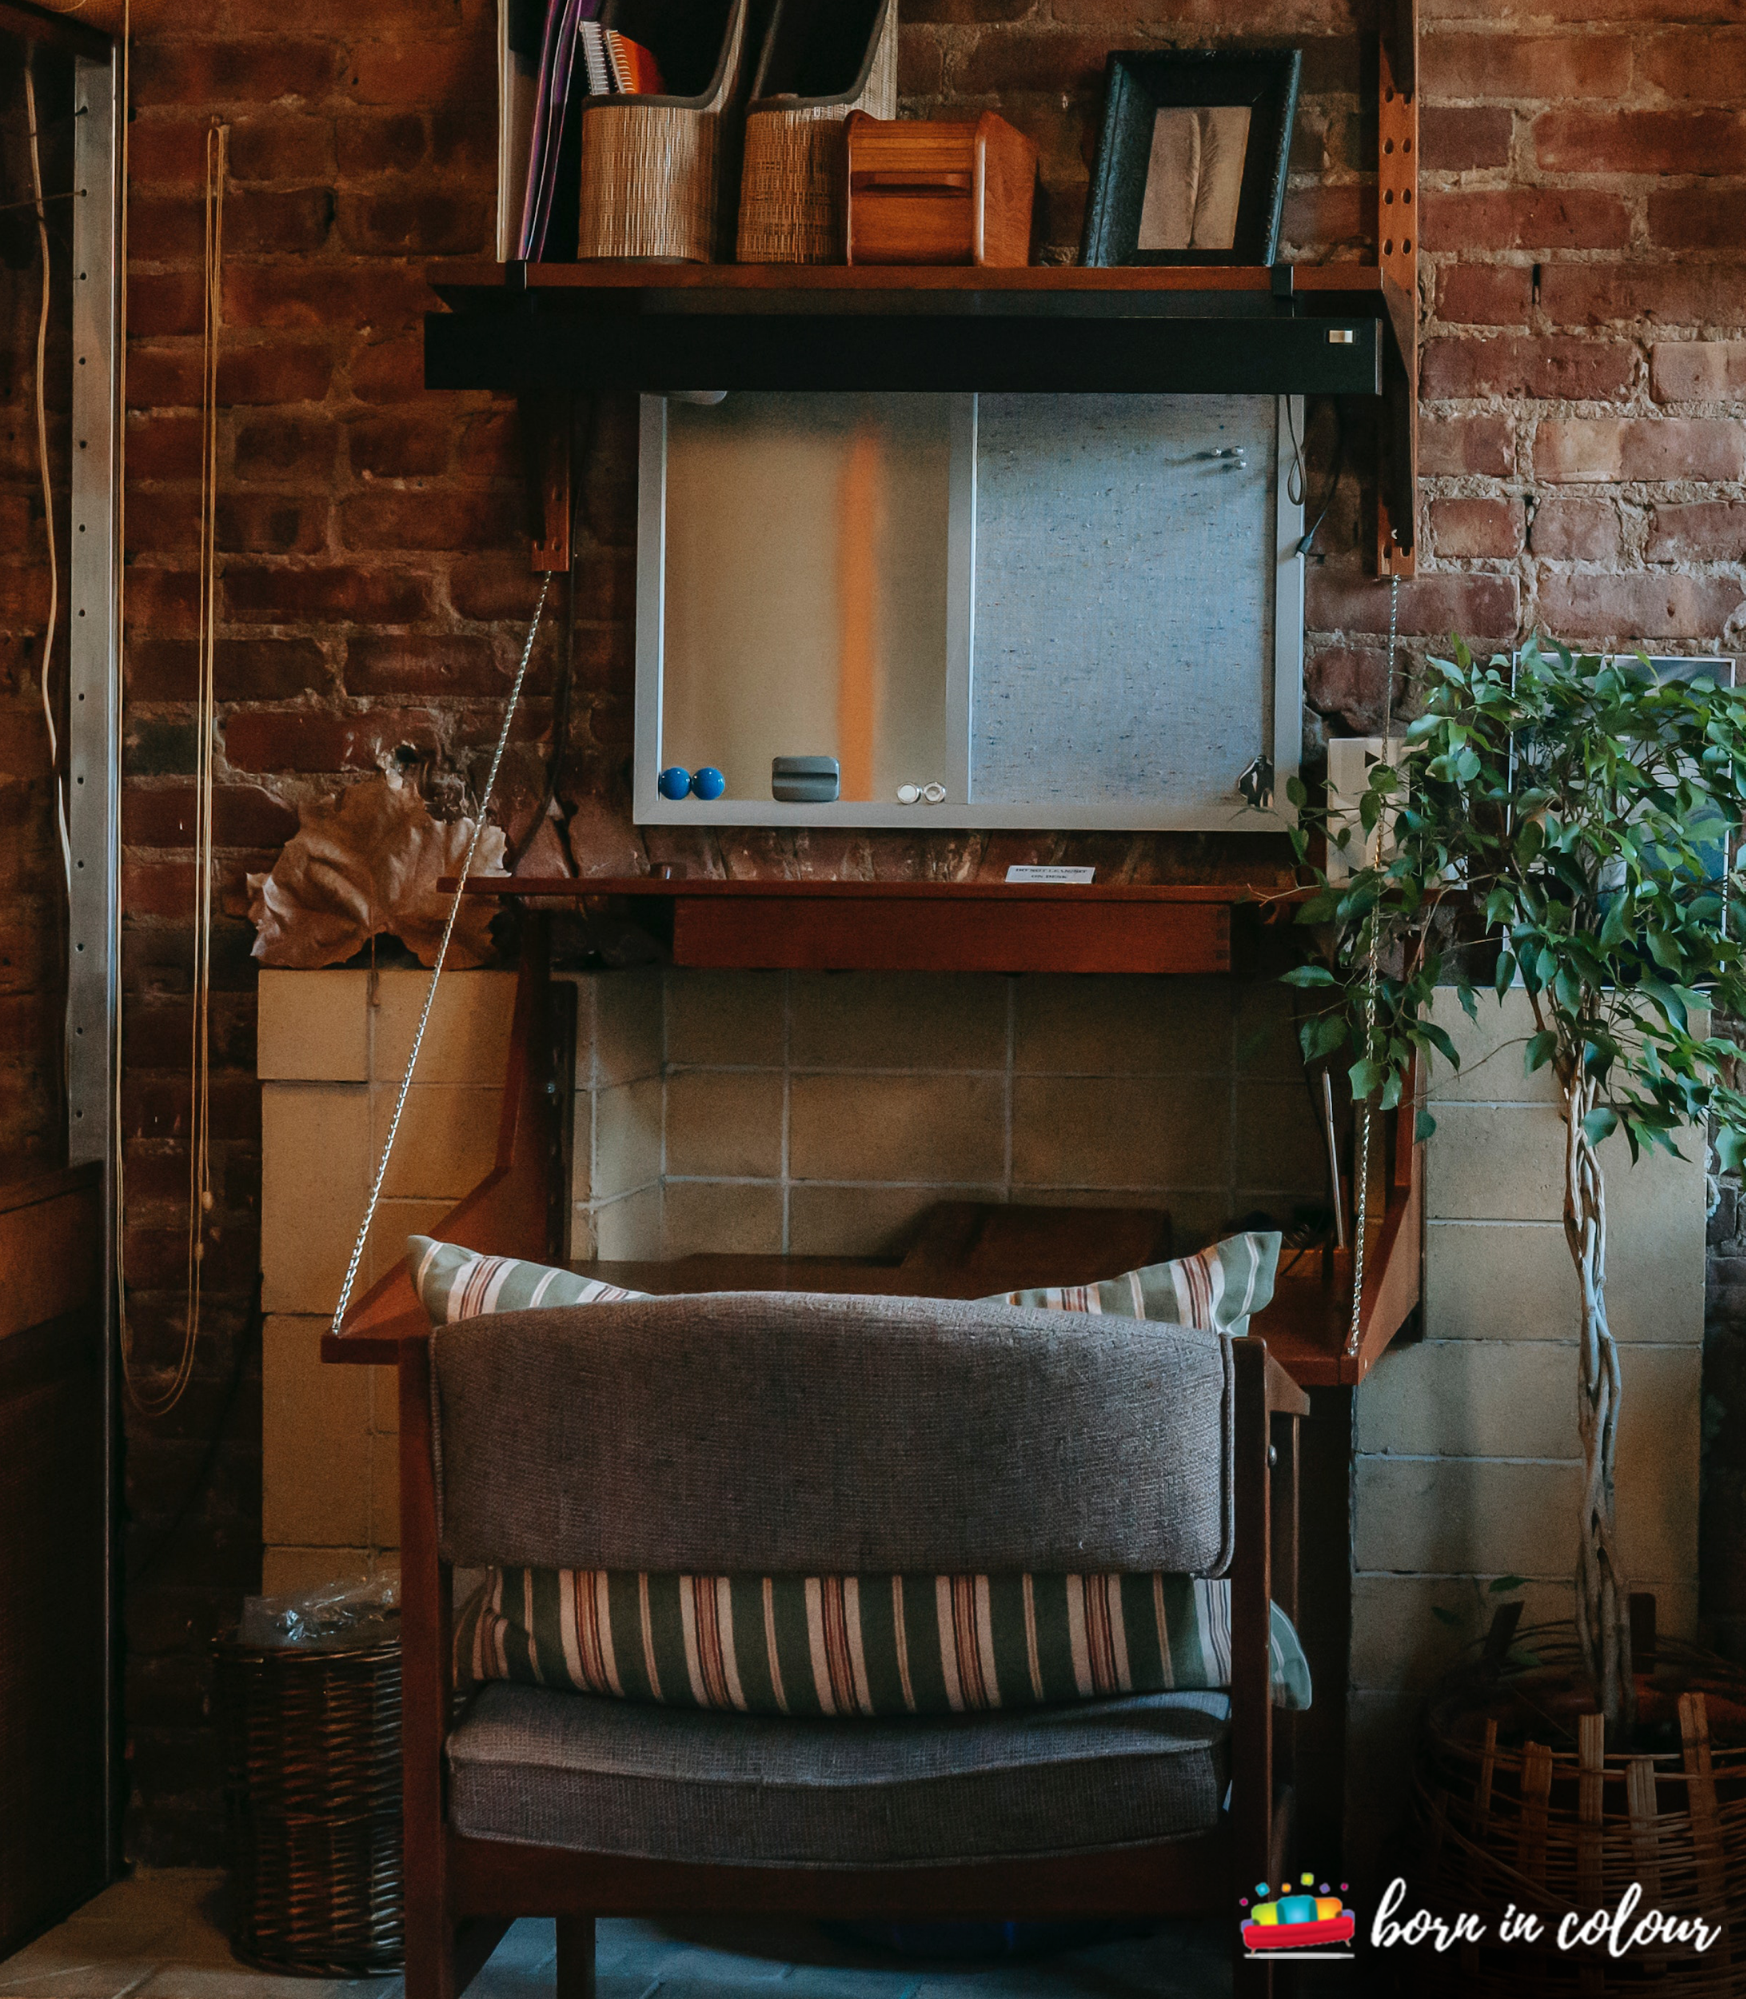 Blast from the Past — Introducing Retro Vintage Furniture